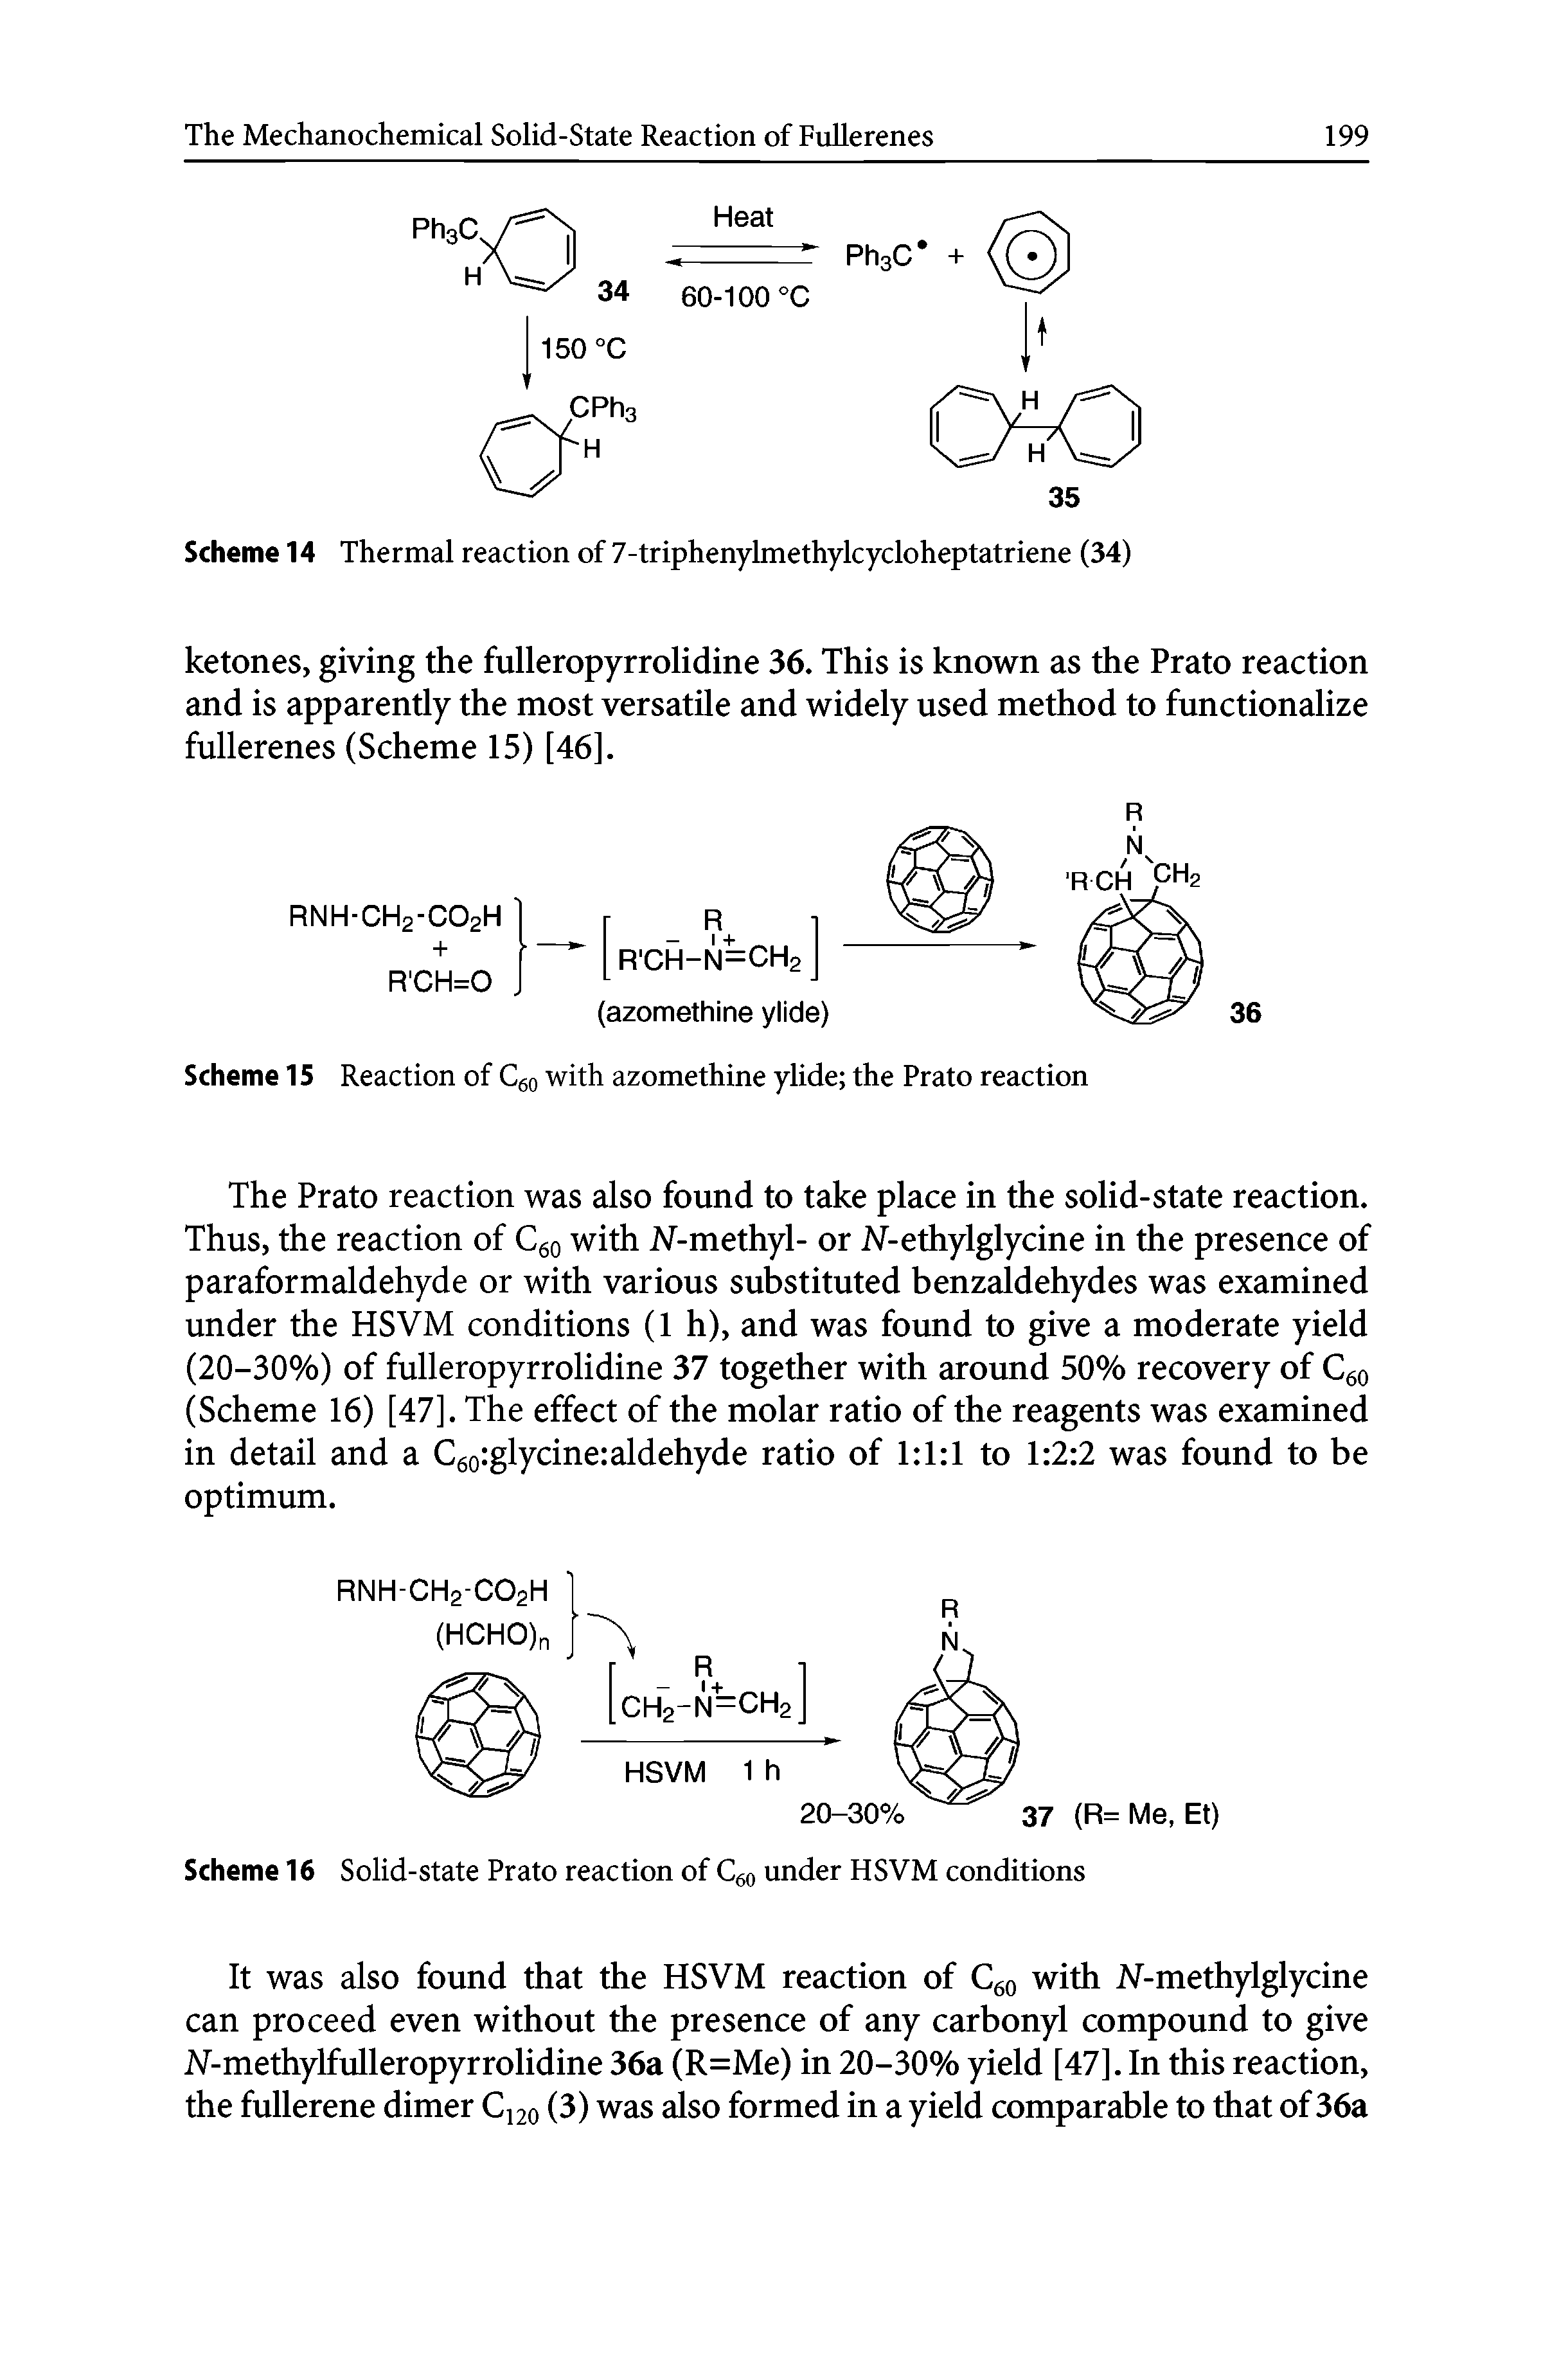 Scheme 15 Reaction of Cgo with azomethine ylide the Prato reaction...